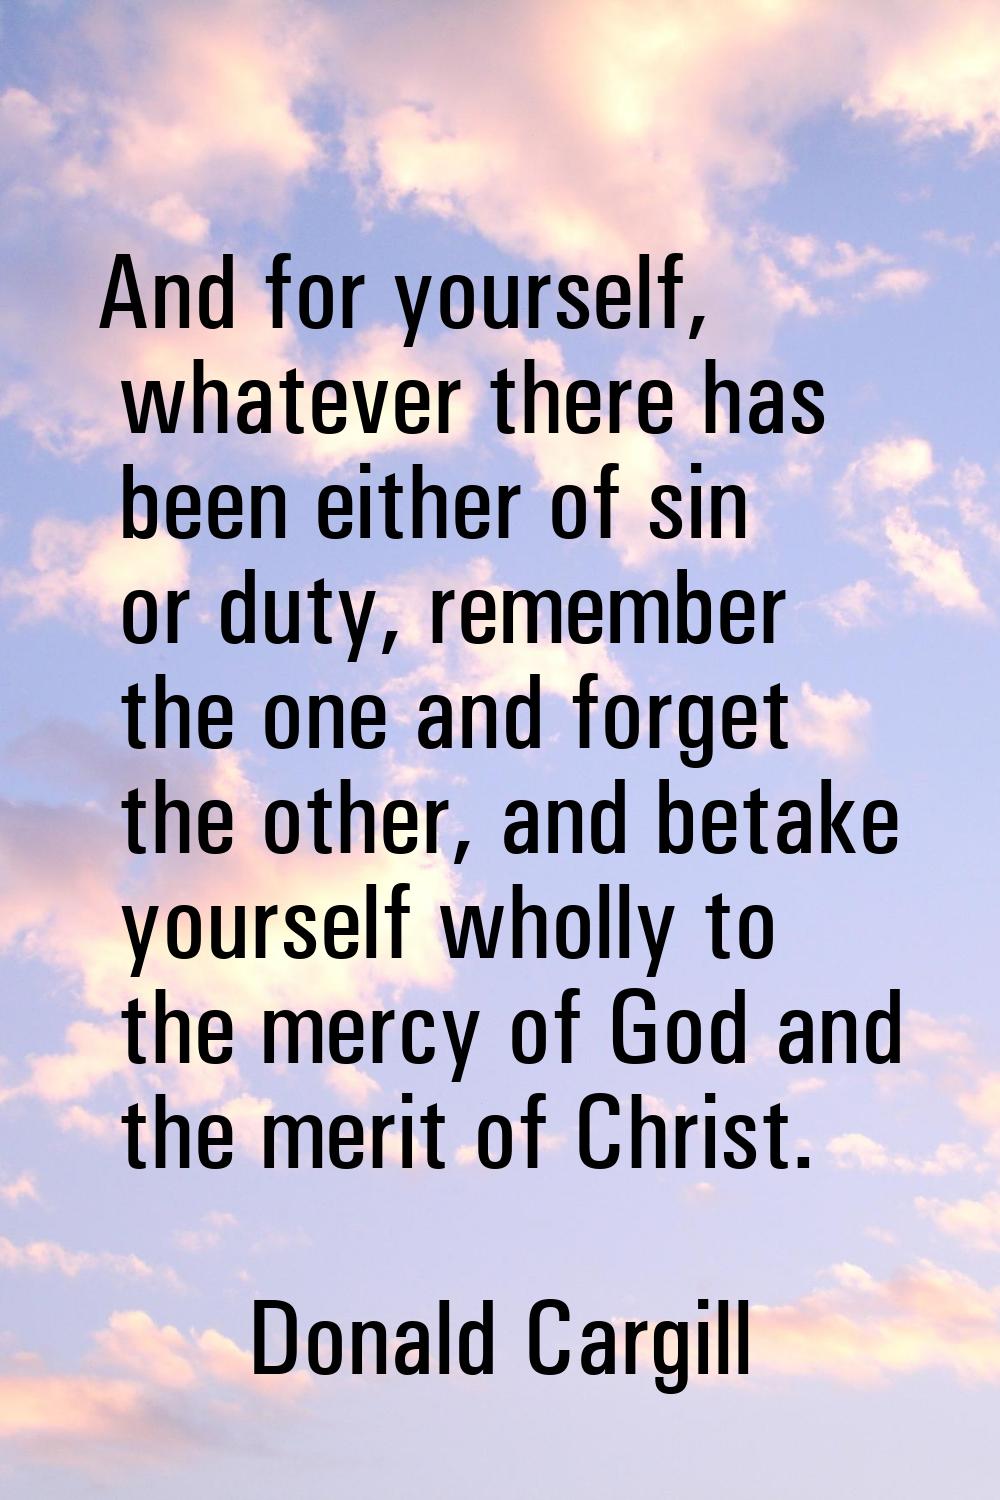 And for yourself, whatever there has been either of sin or duty, remember the one and forget the ot